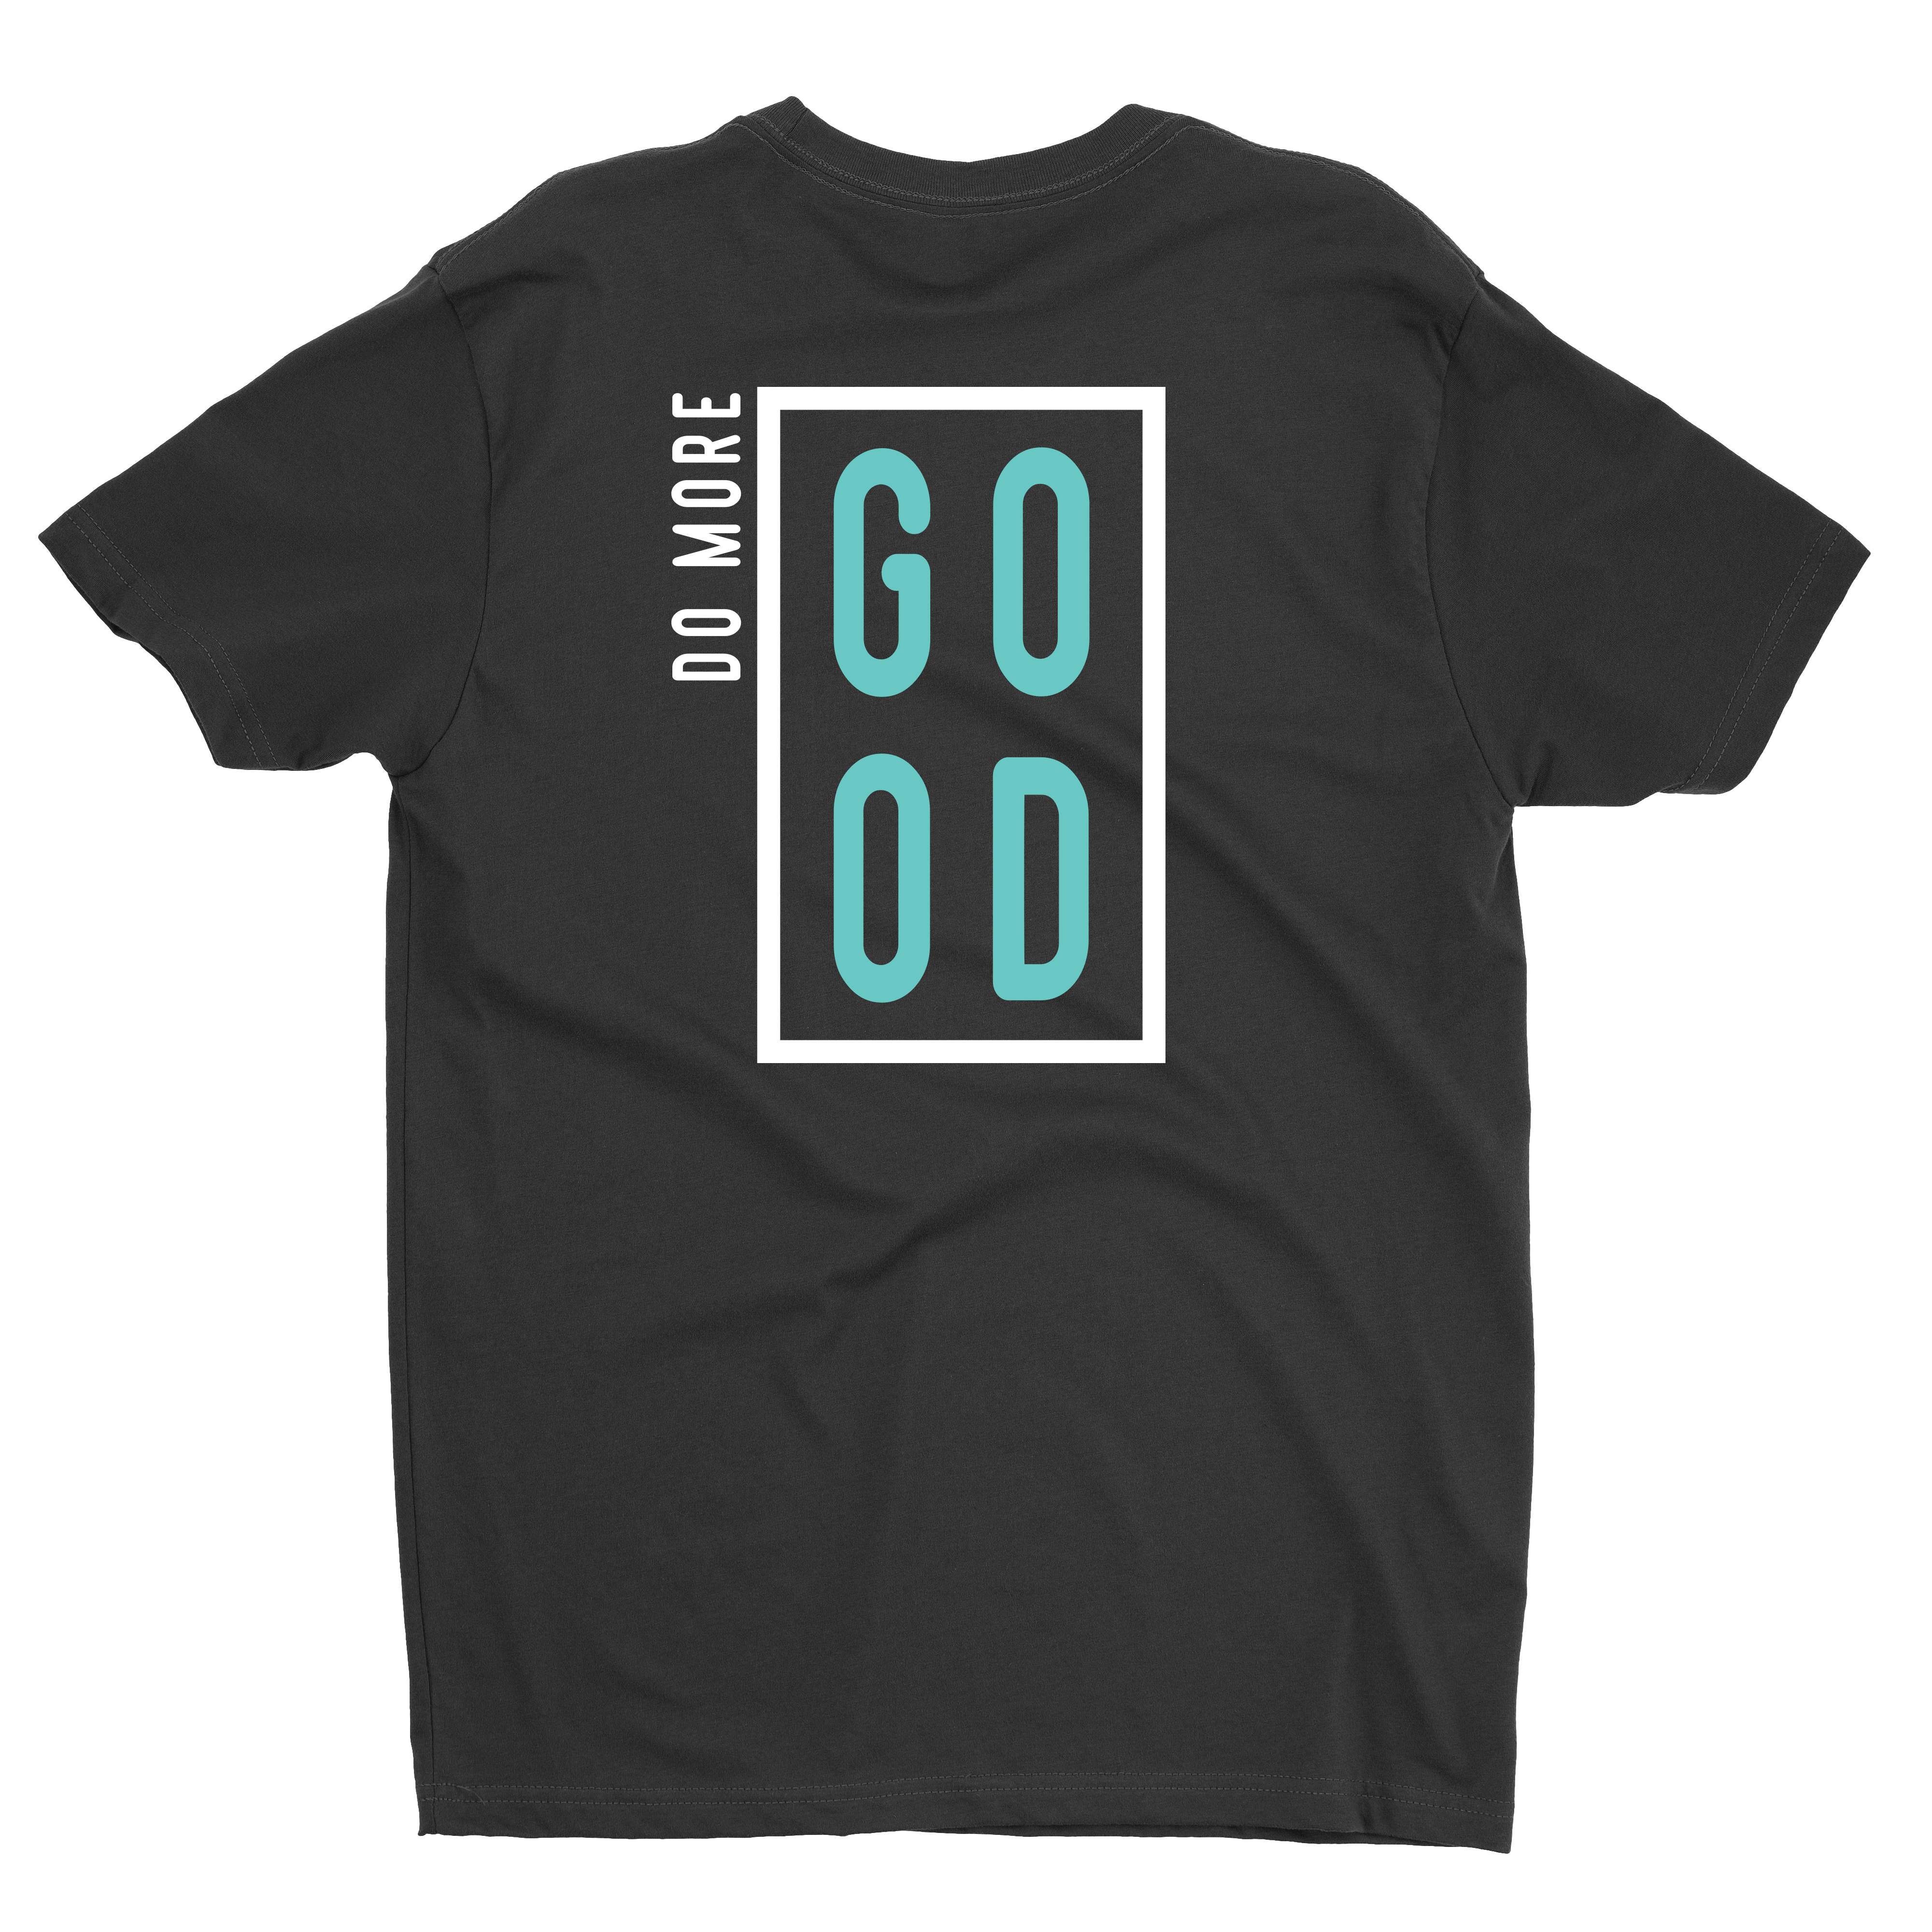 Do More Good Tee - Only Human